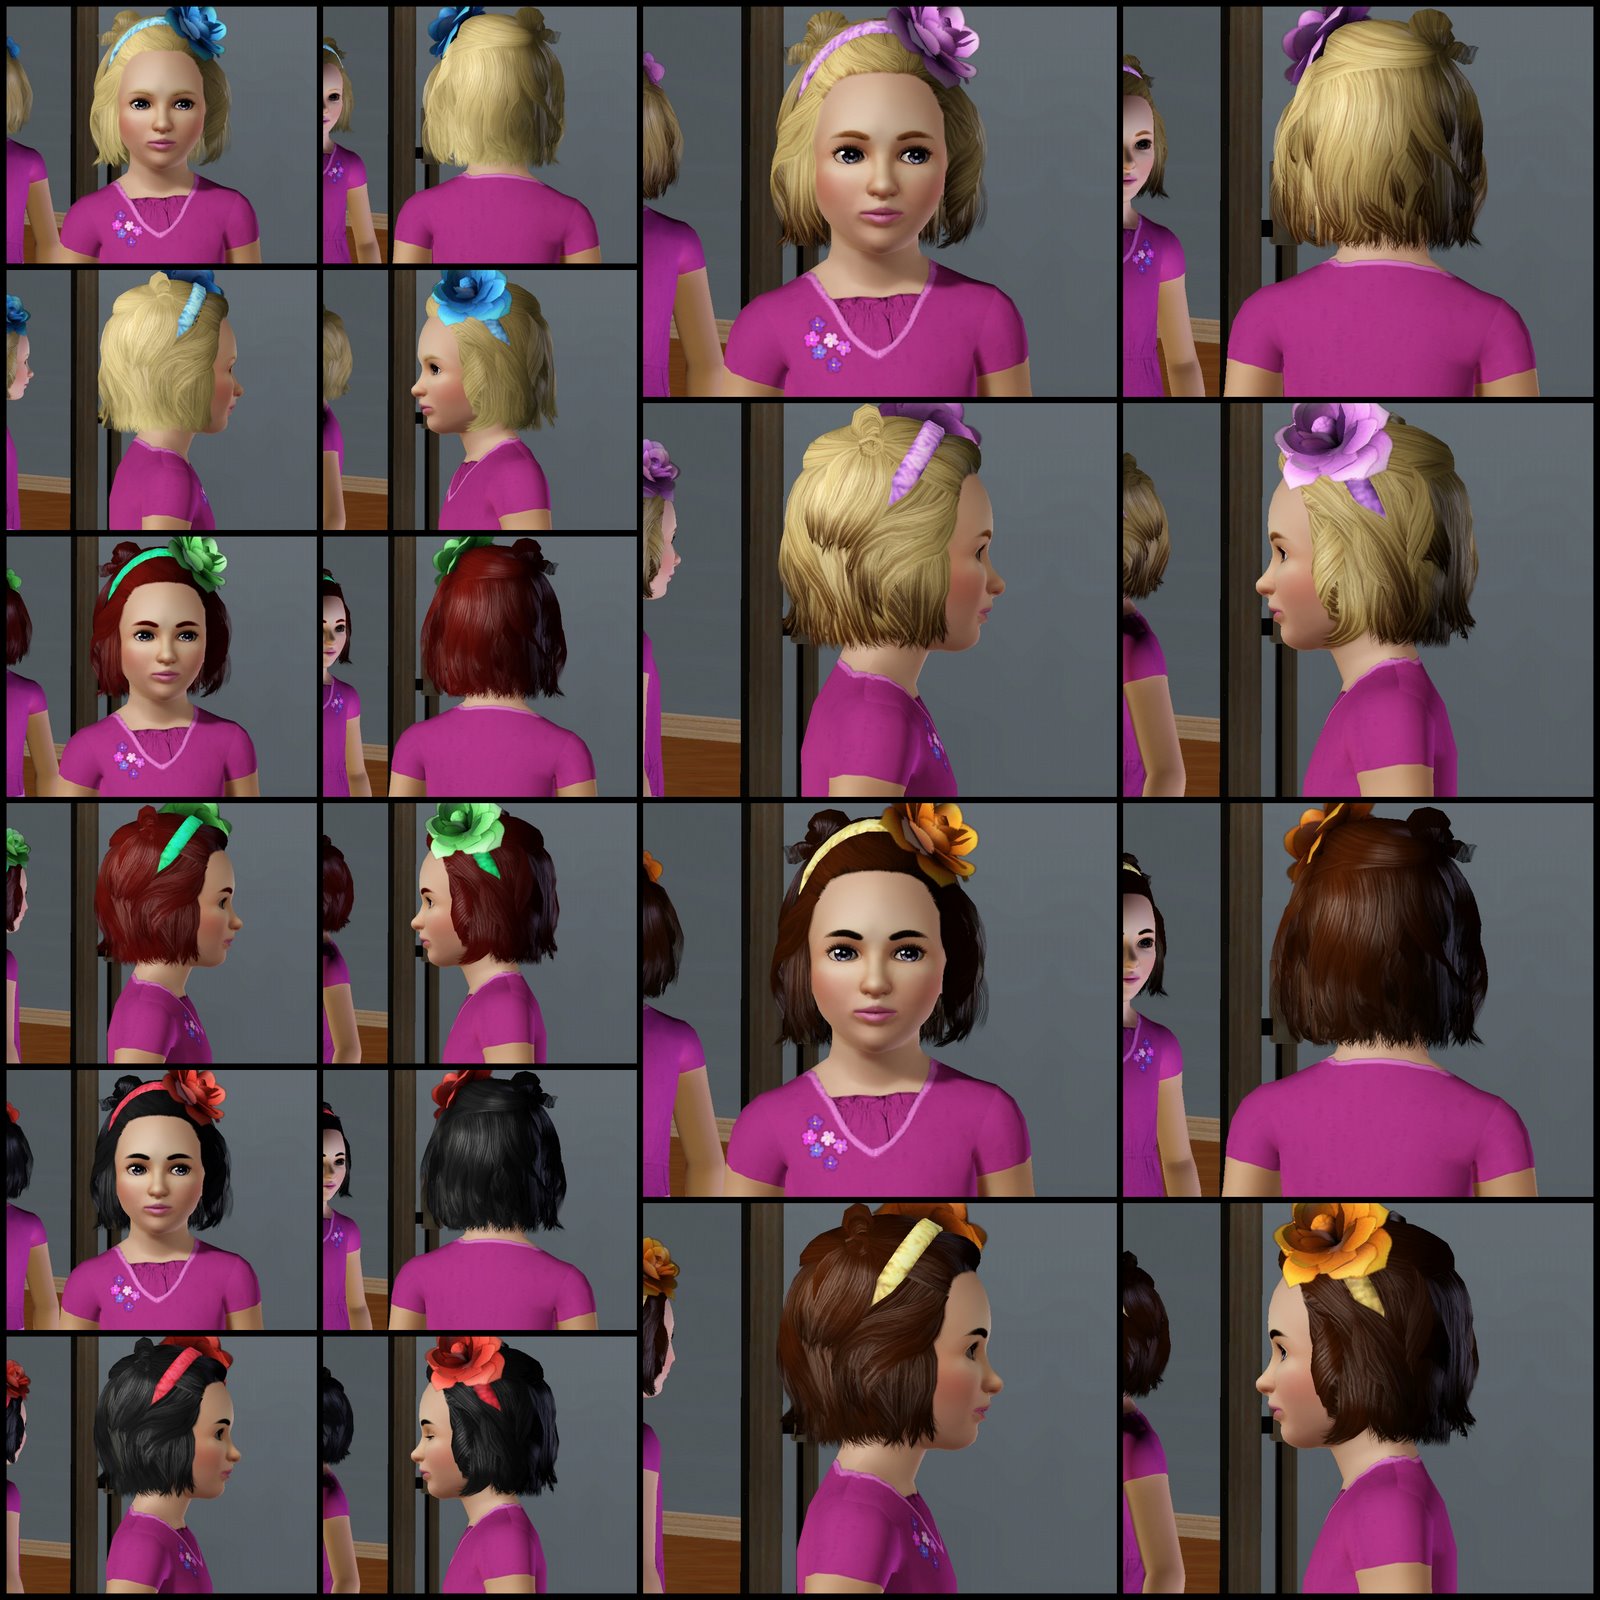 The Sims 3 Store: Hair Showroom: Sweeter than Flowers